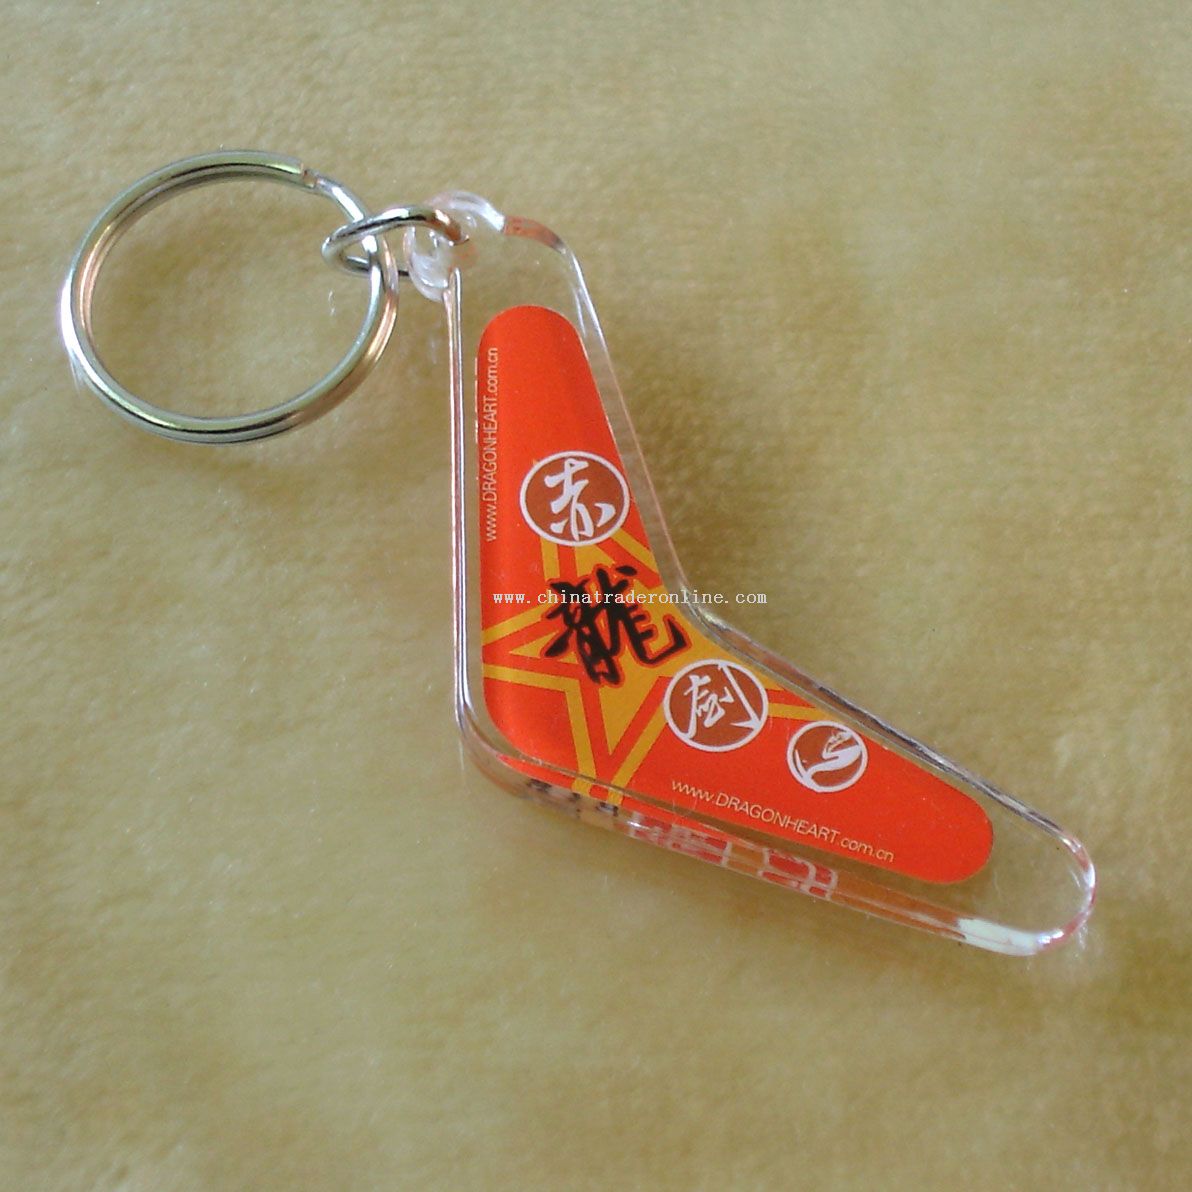 Acrylic solid keychain from China